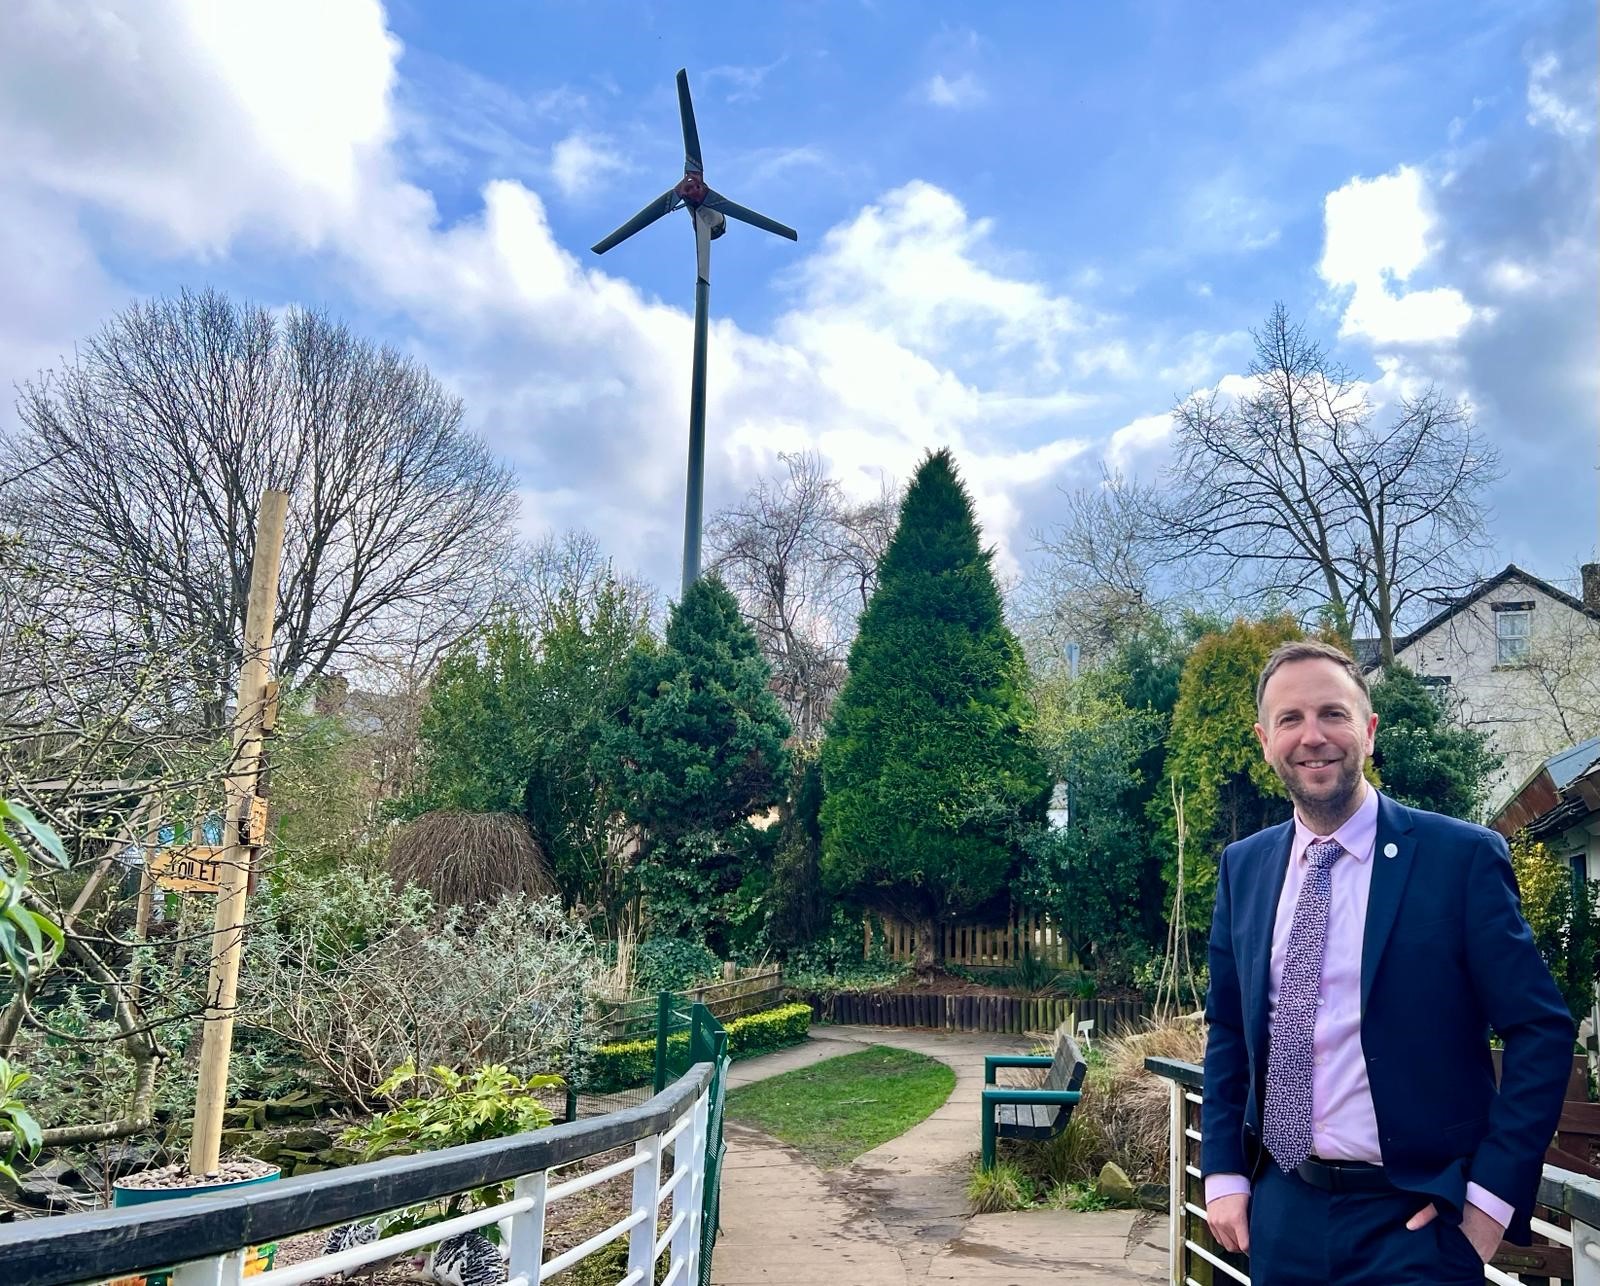 Cllr Ben Miskell stands in the foreground with a wind turbine in the background, scattered throughout the picture are a number of trees and a path disappears off into the distance